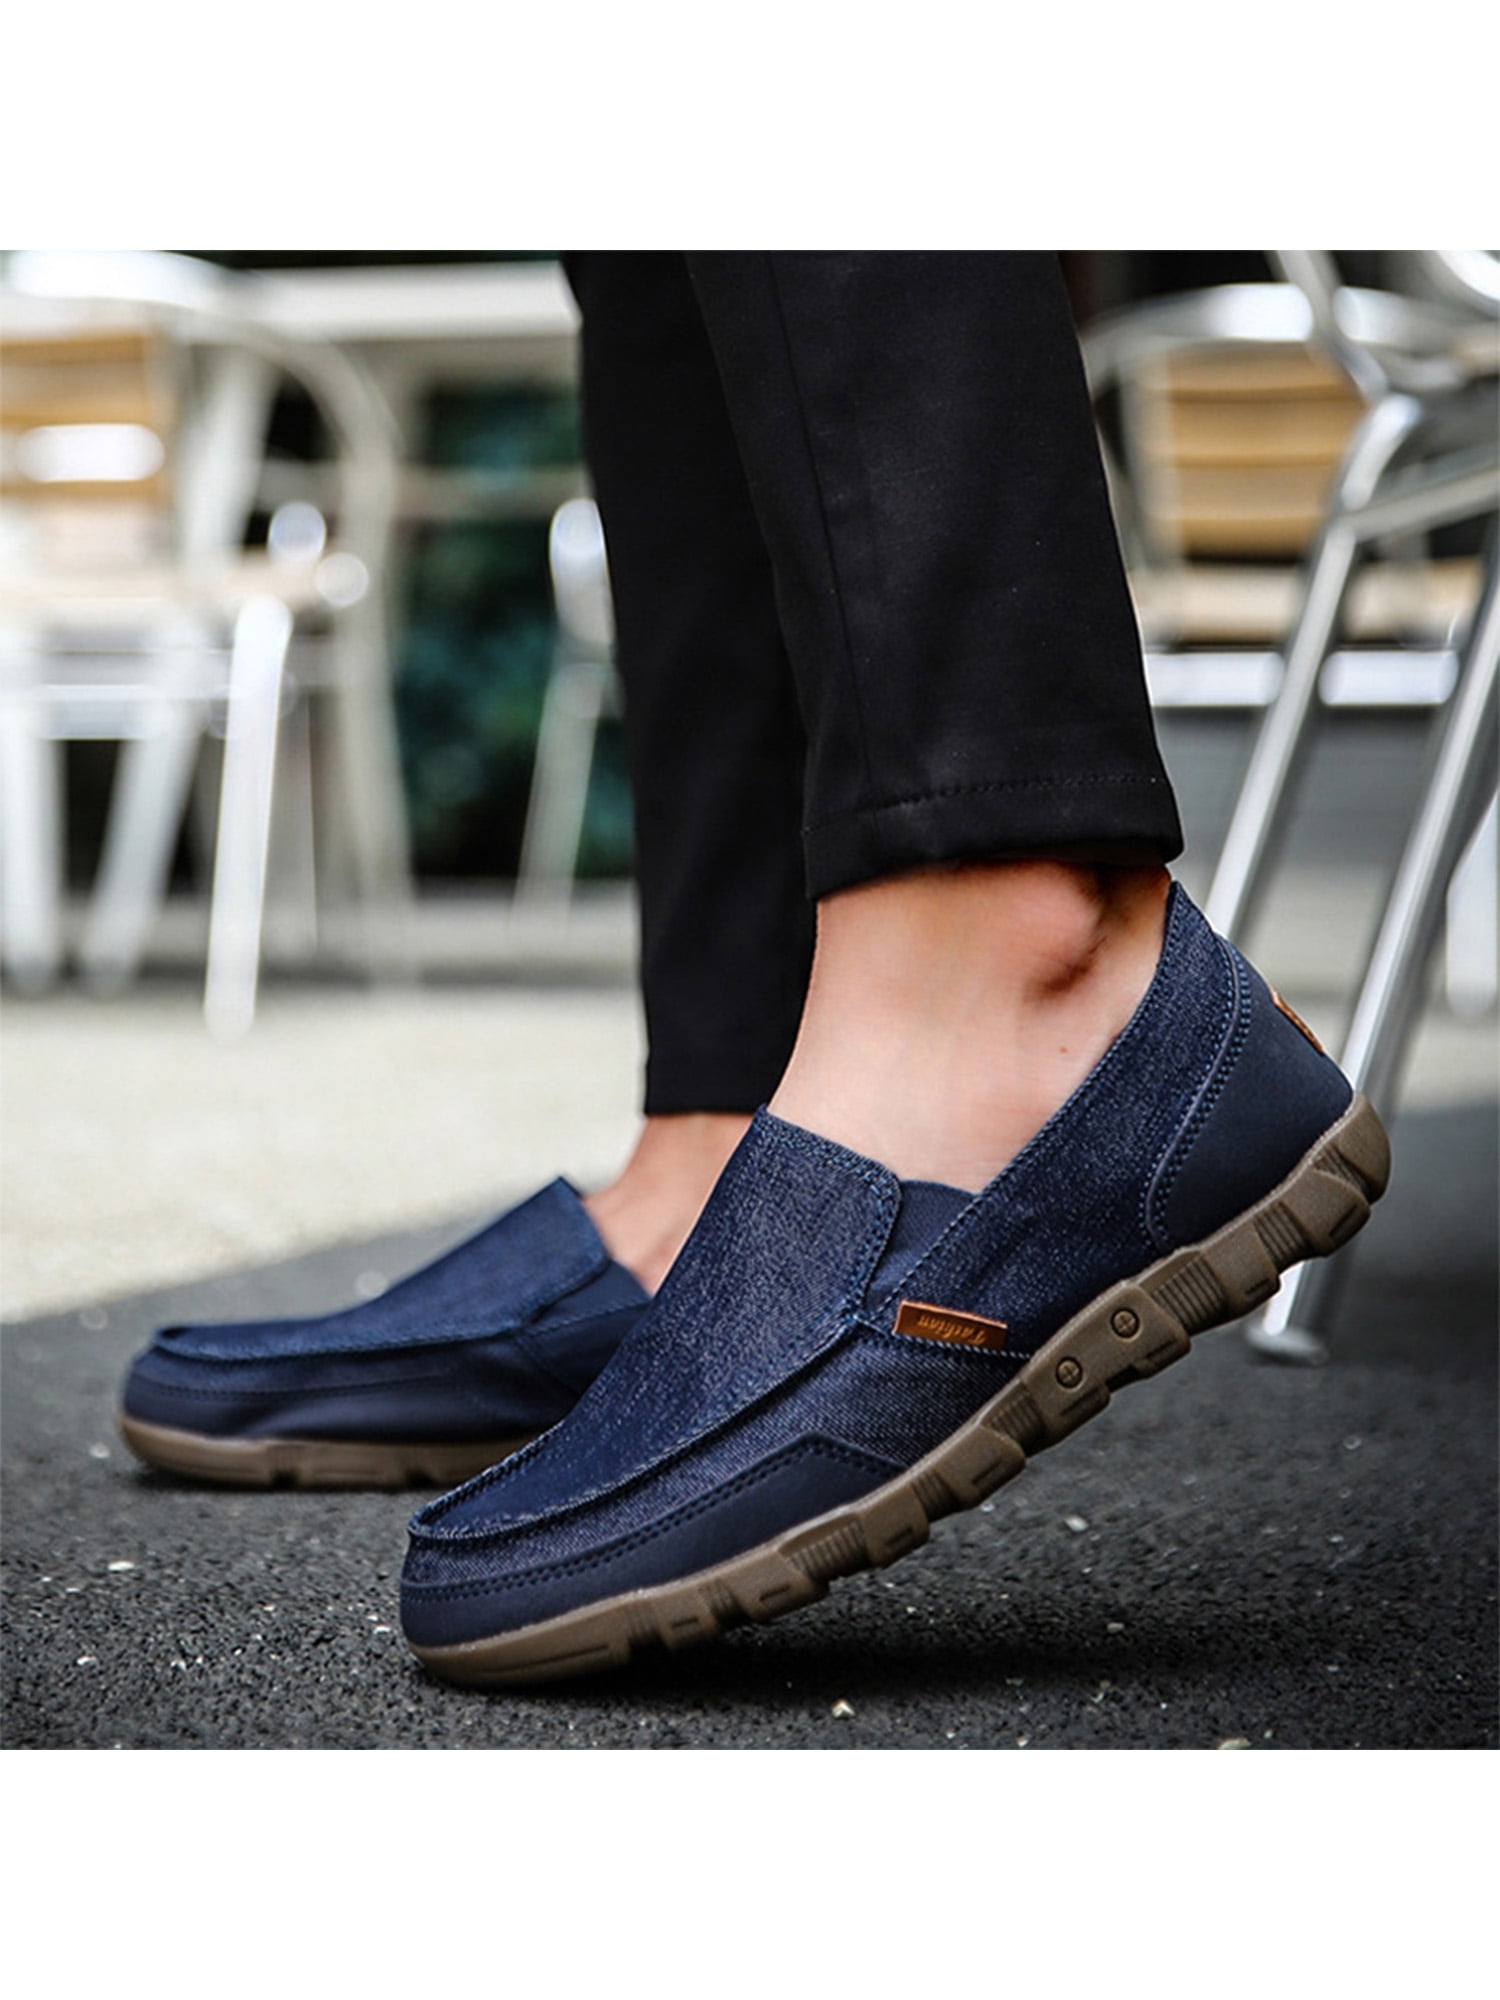 New Fashion Men's Casual Breathable Loafers Canvas Driving Flats Shoes 